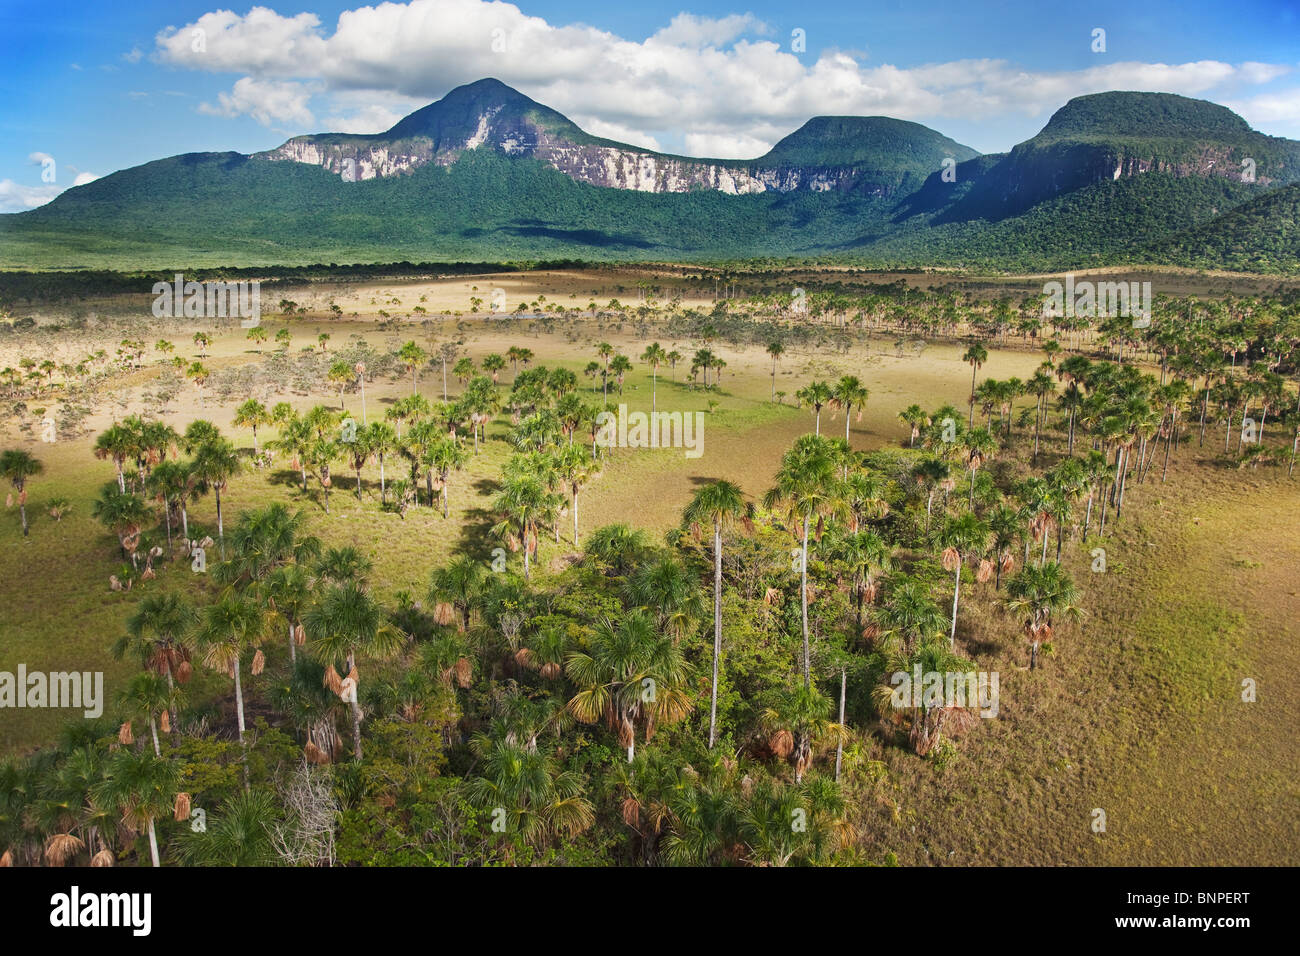 The Gran Sabana or Great Savanna lies on a plateau dotted with huge table-top mountains called Tepuis Venezuela  south America Stock Photo